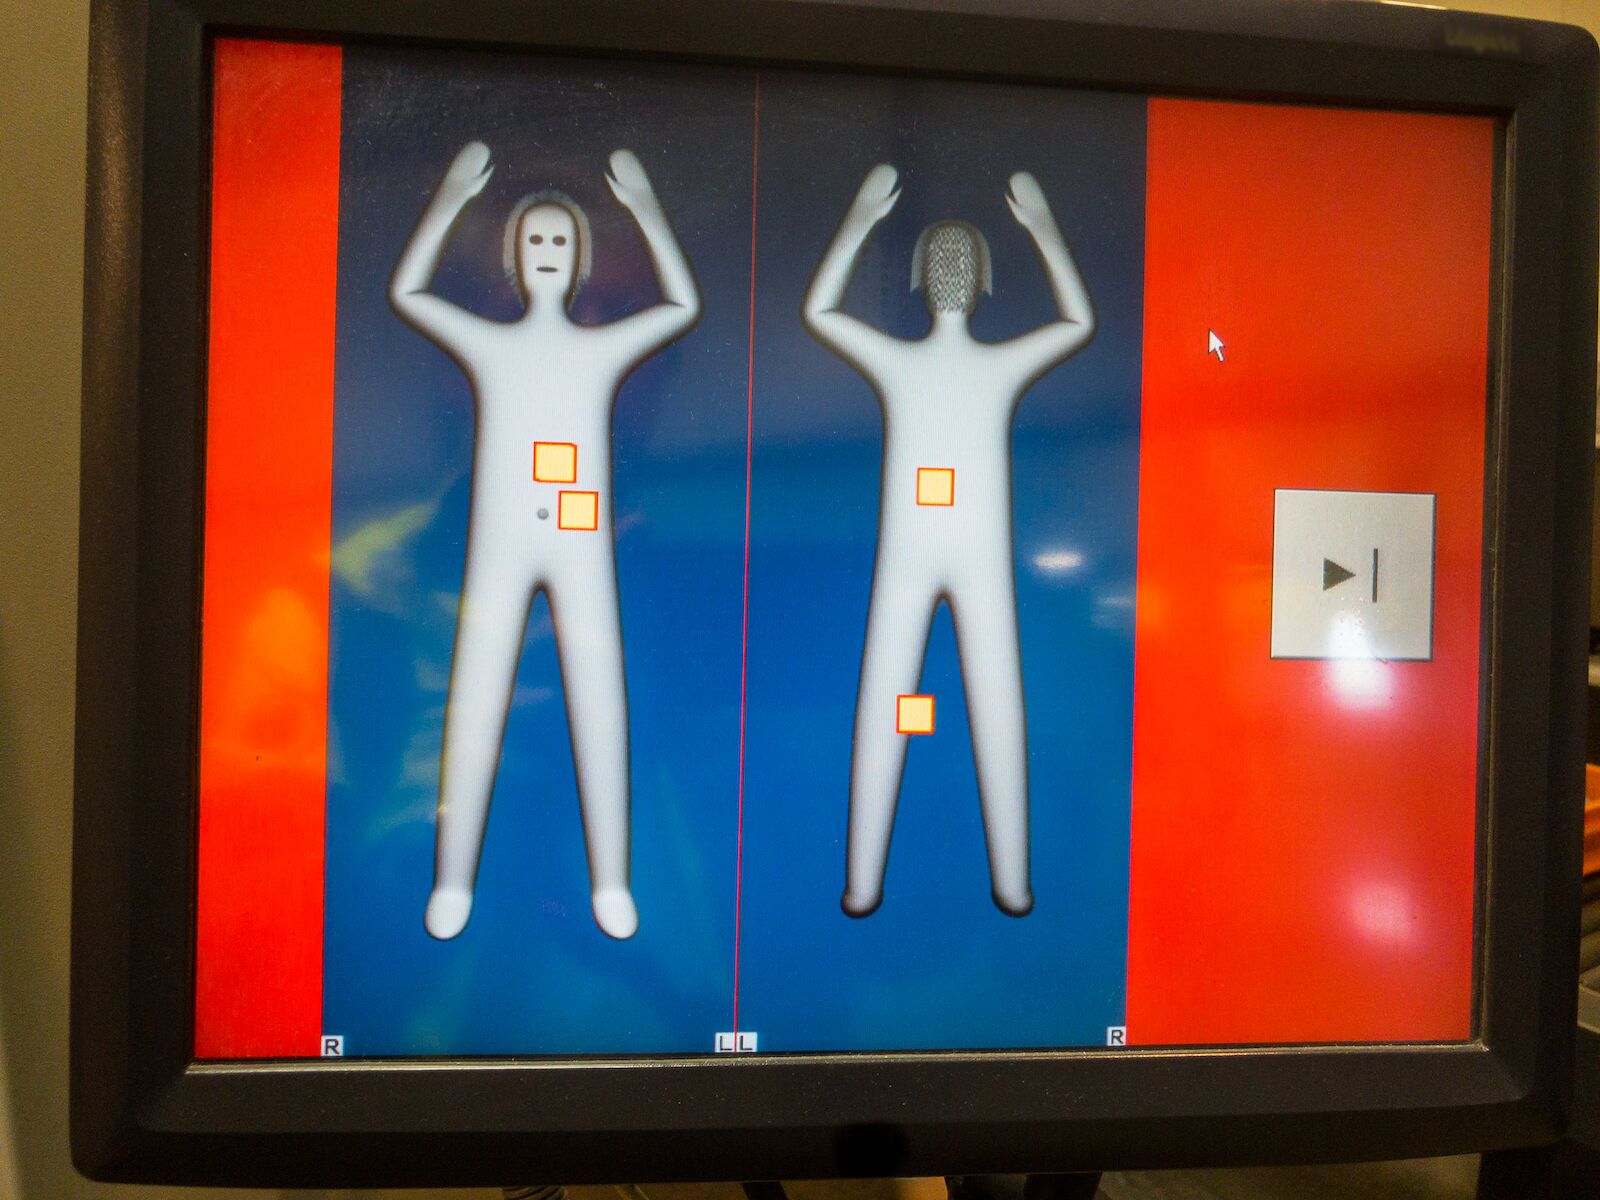 Full-body scanner at airports